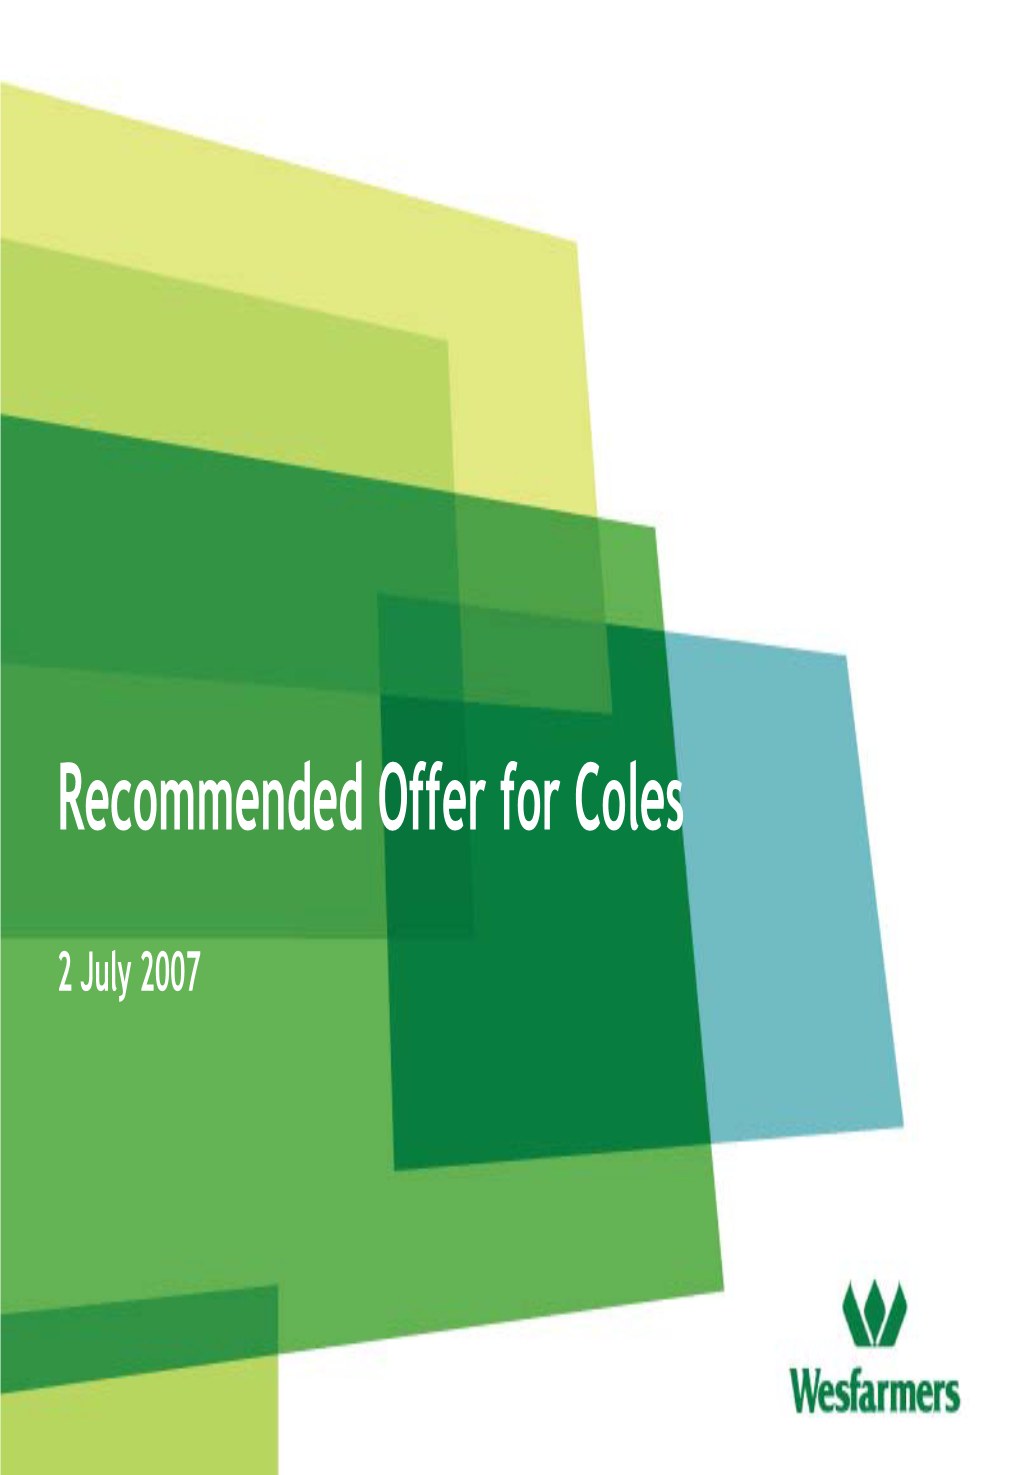 Recommended Offer for Coles